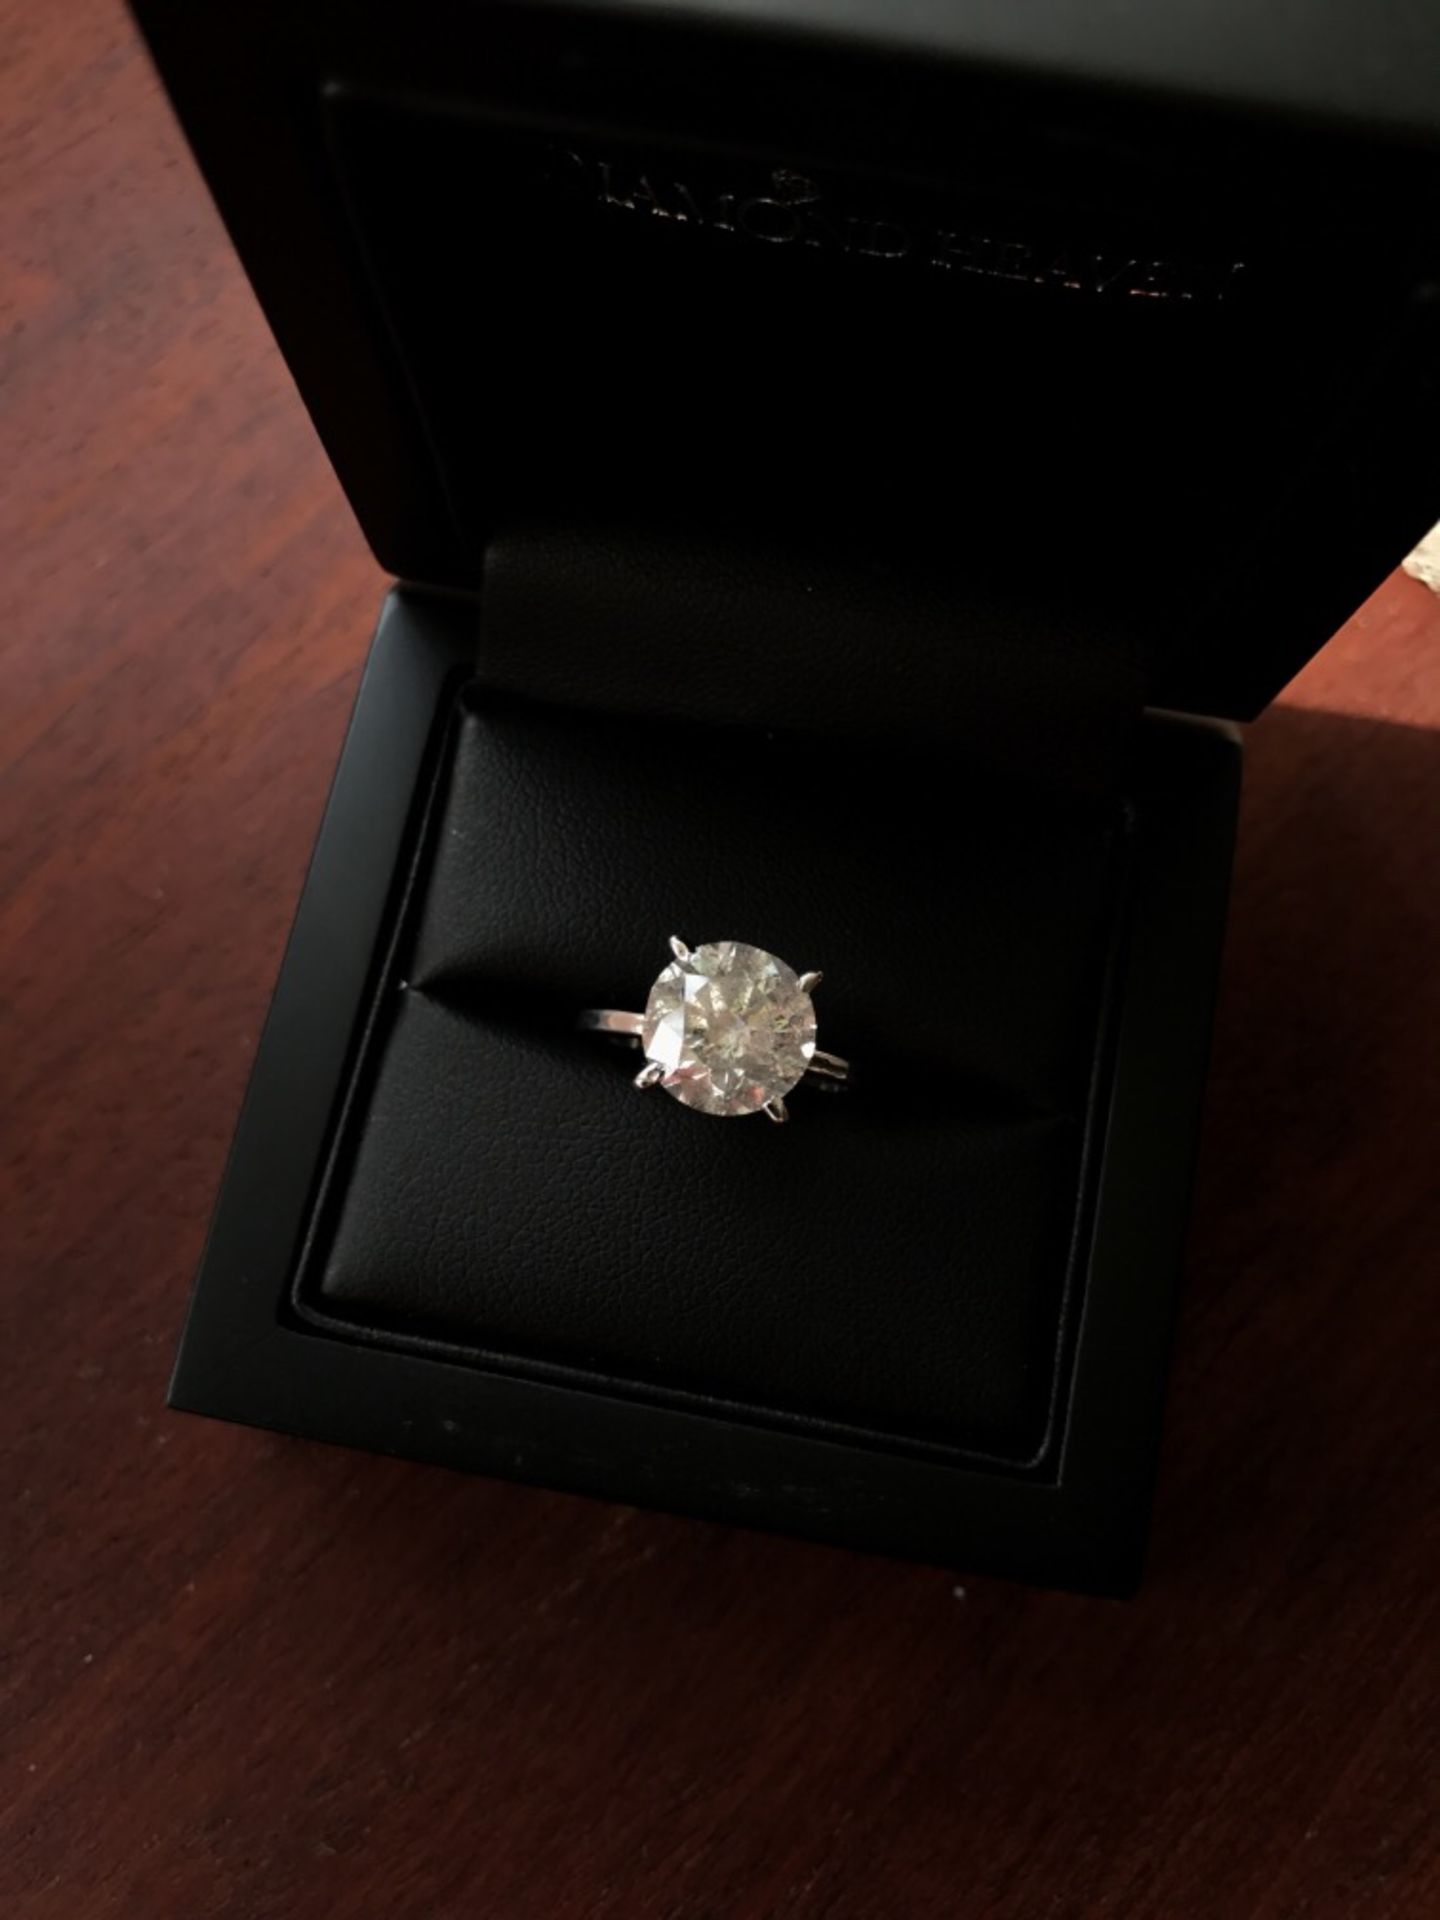 4.36CT DIAMOND SOLITAIRE RING SET IN WHITE METAL (TESTED AS 14CT) - Image 3 of 4